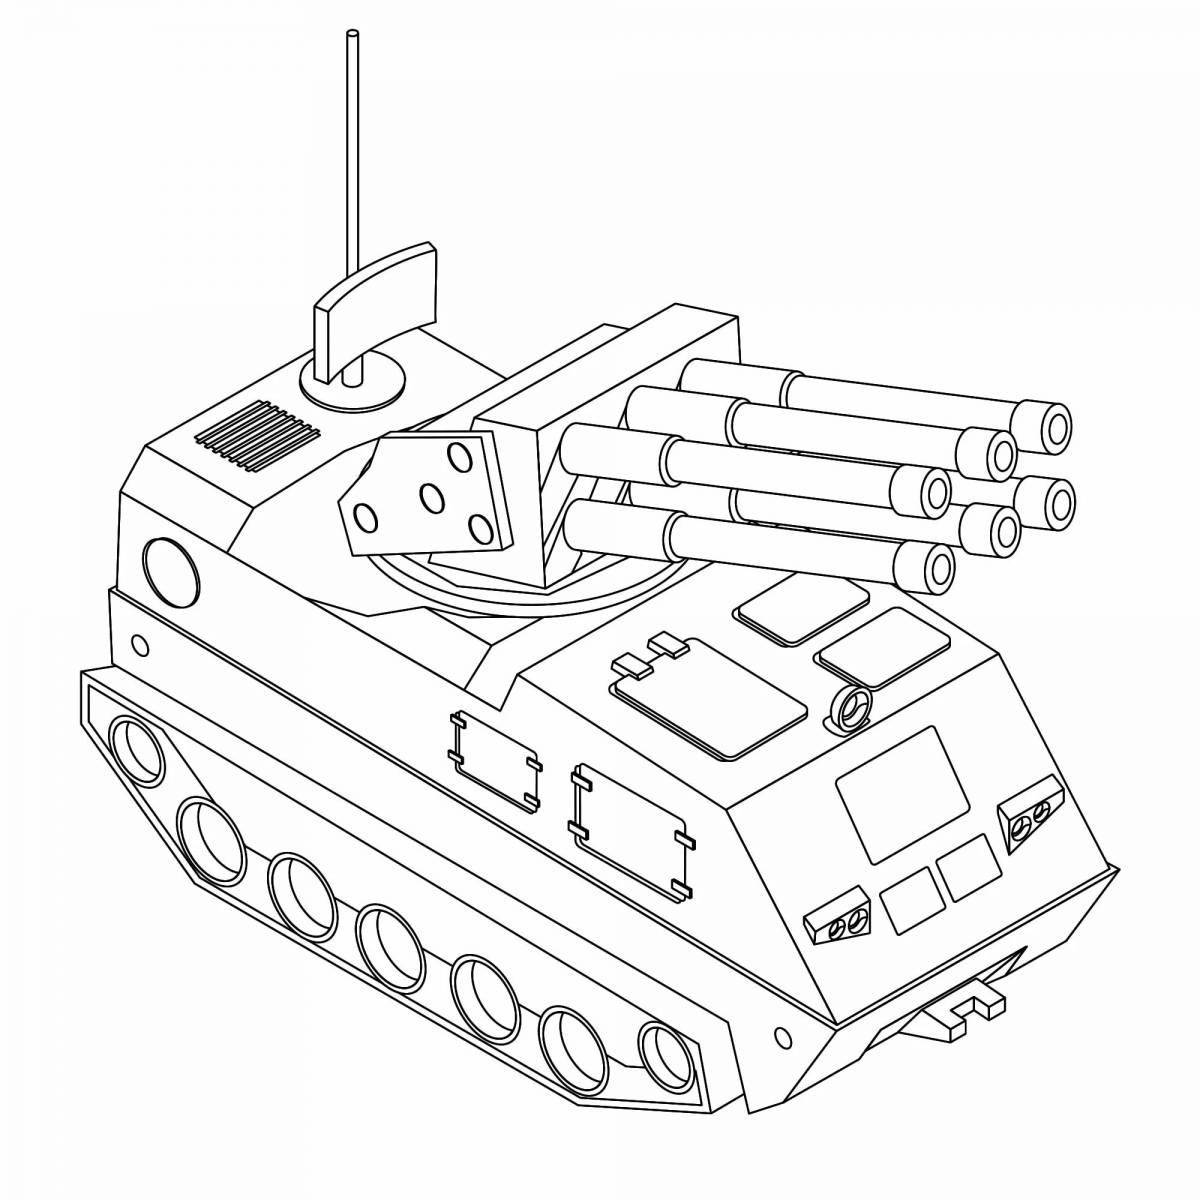 Fun coloring tank for children 4-5 years old